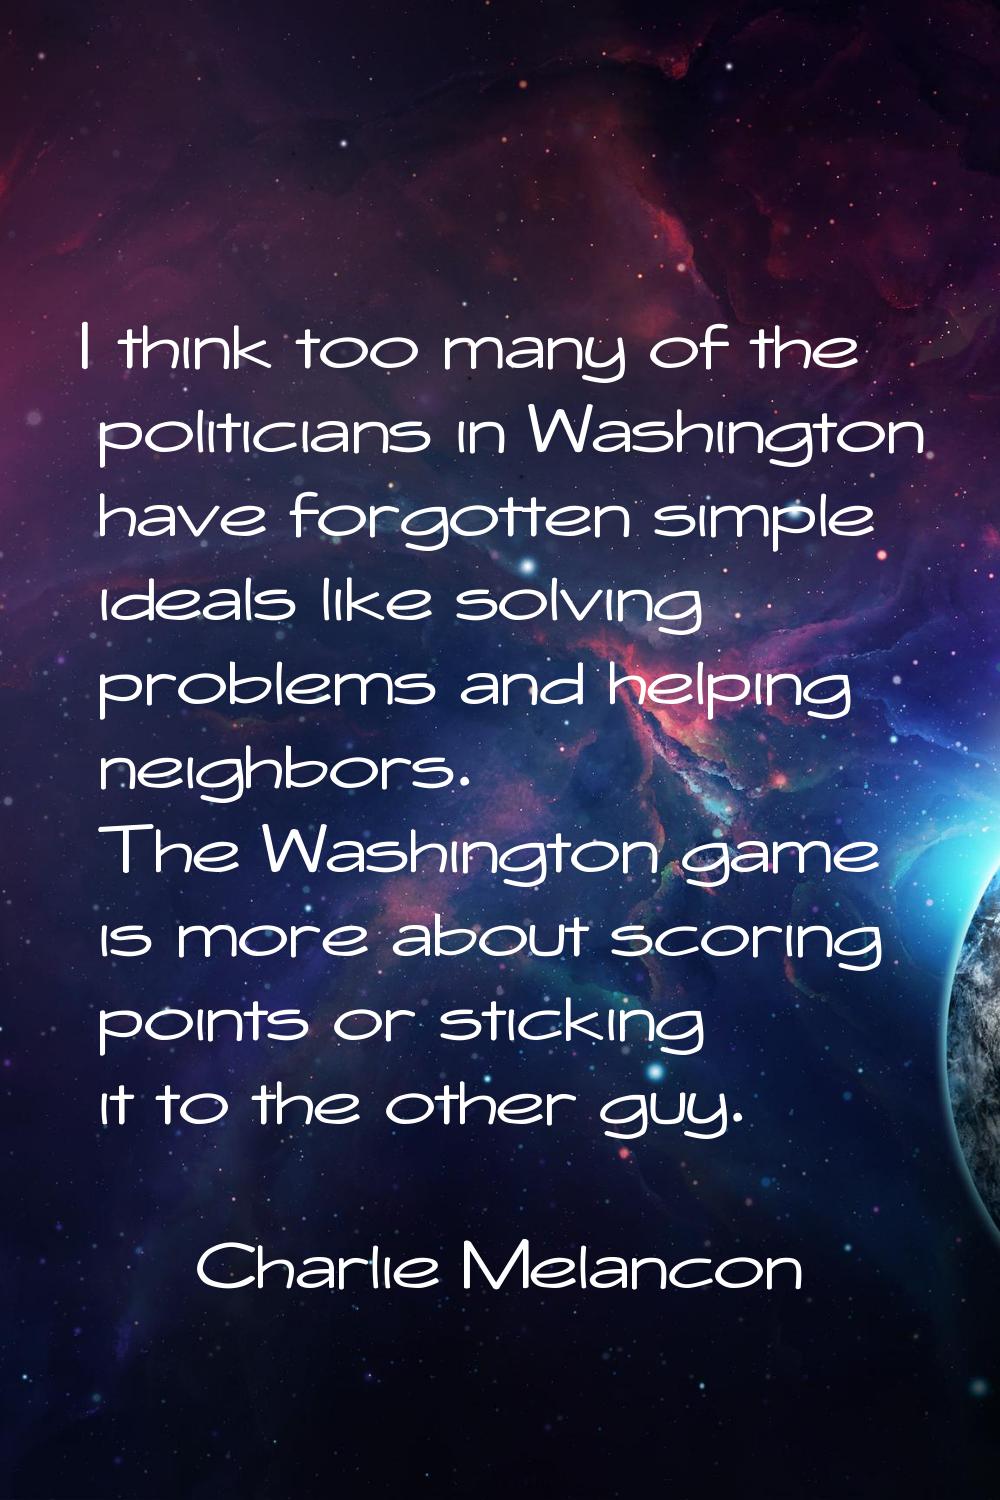 I think too many of the politicians in Washington have forgotten simple ideals like solving problem